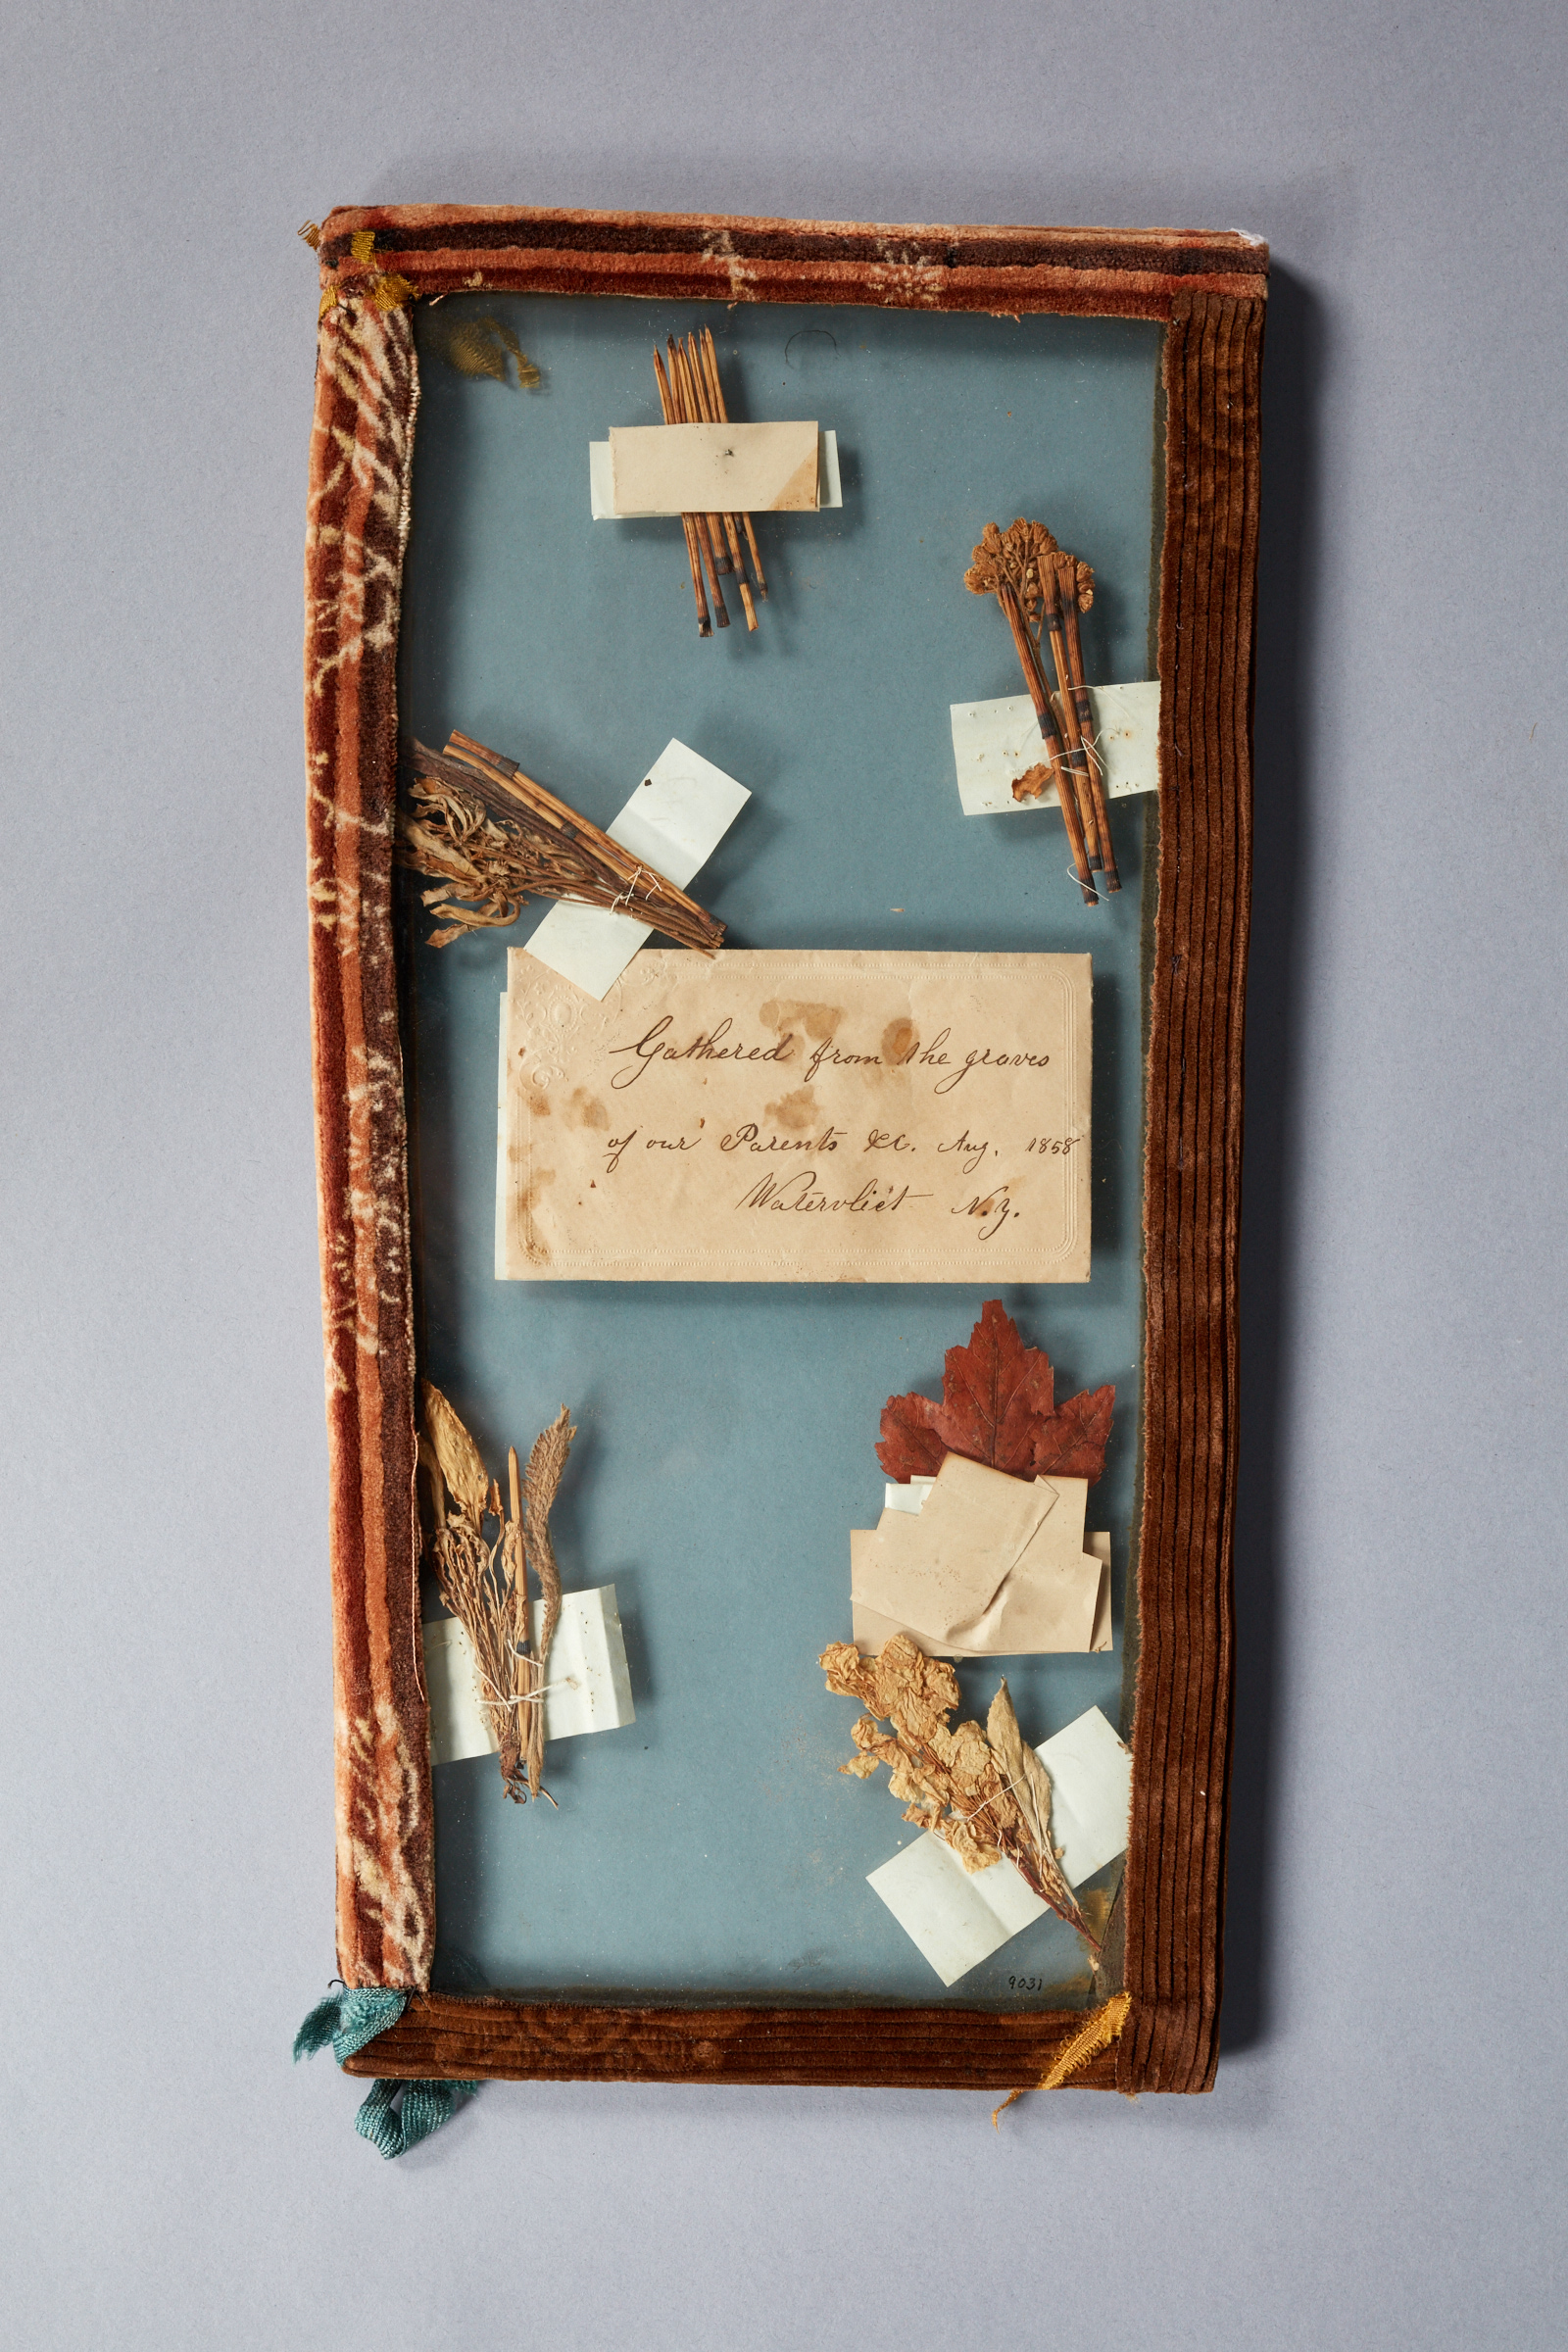 A wooden frame with dried leaves and a note.